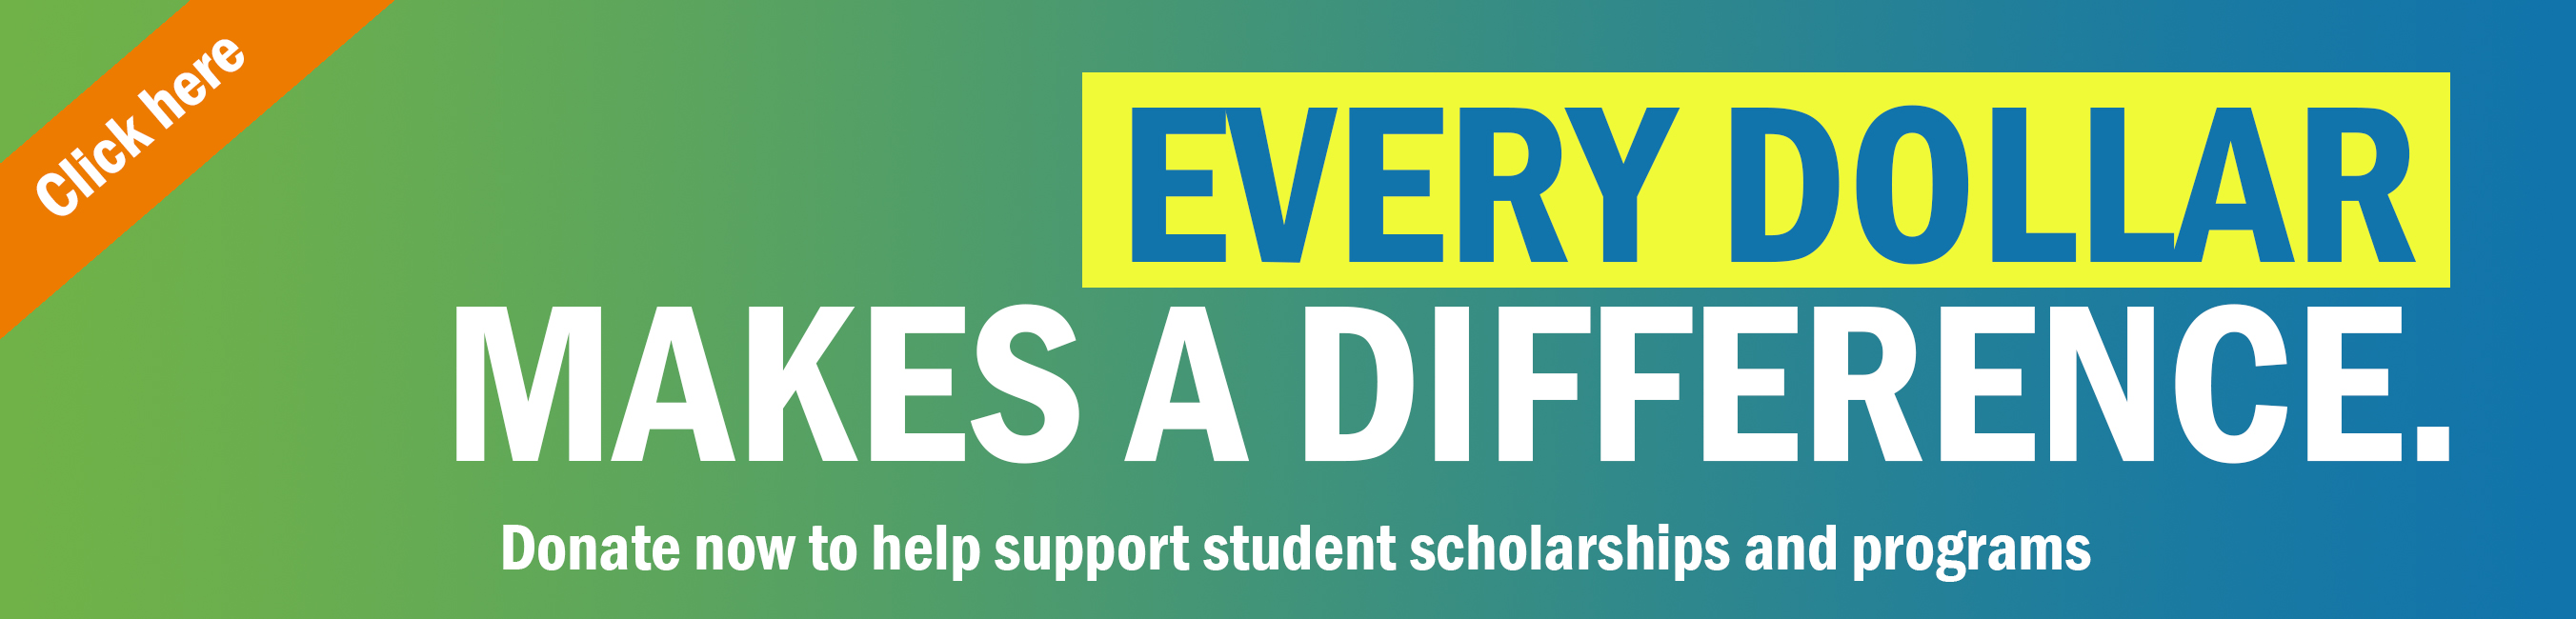 Every dollar makes a difference. Donate now to help support student scholarships and programs. Click here to donate.